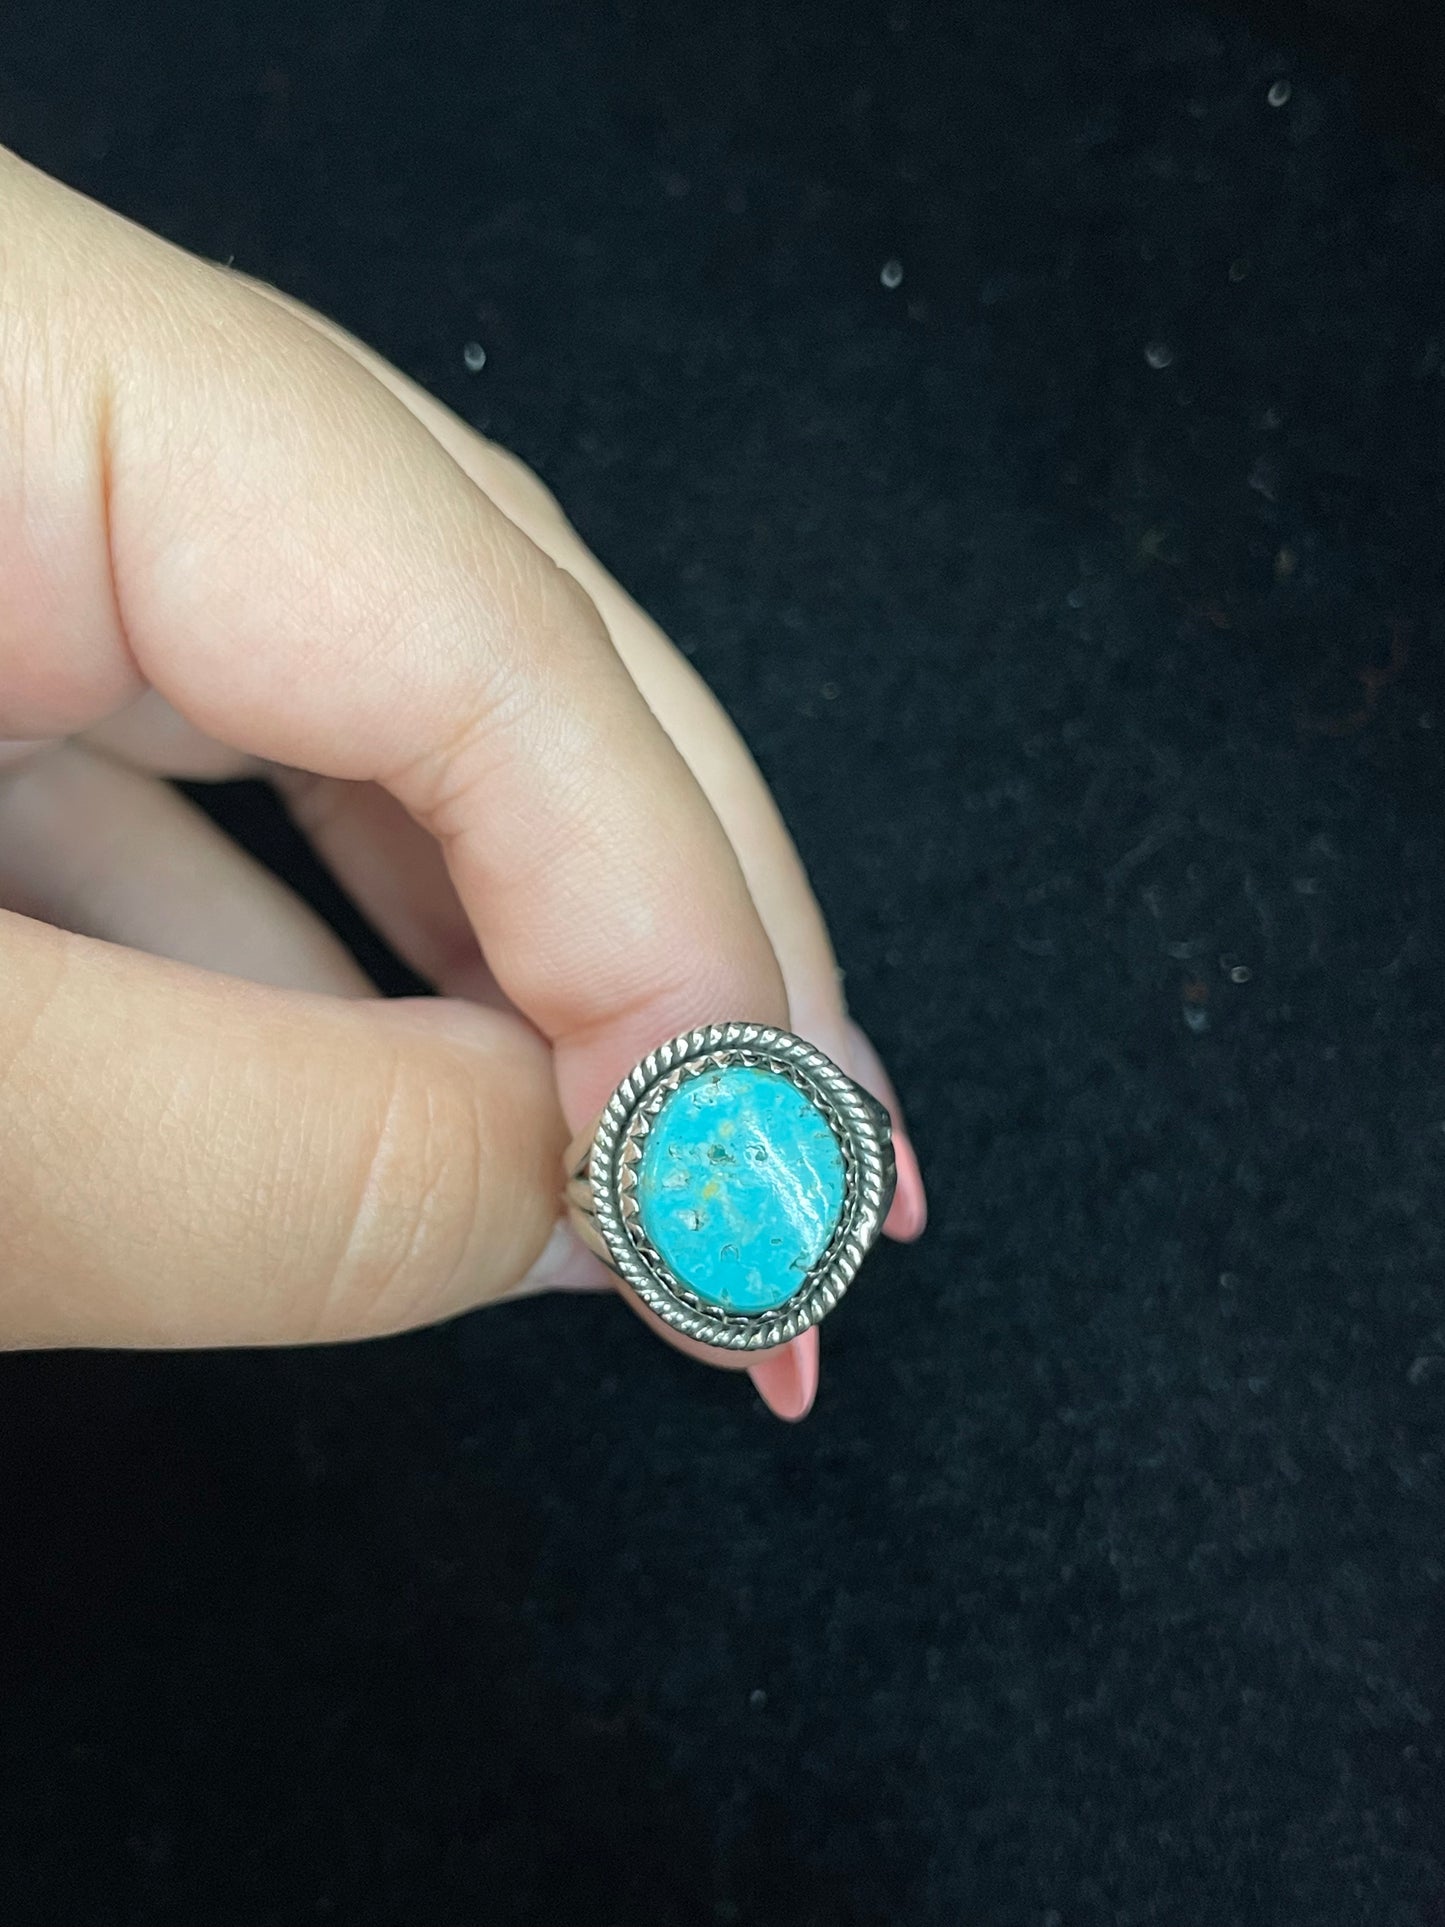 7.0 Turquoise Ring by Running Bear